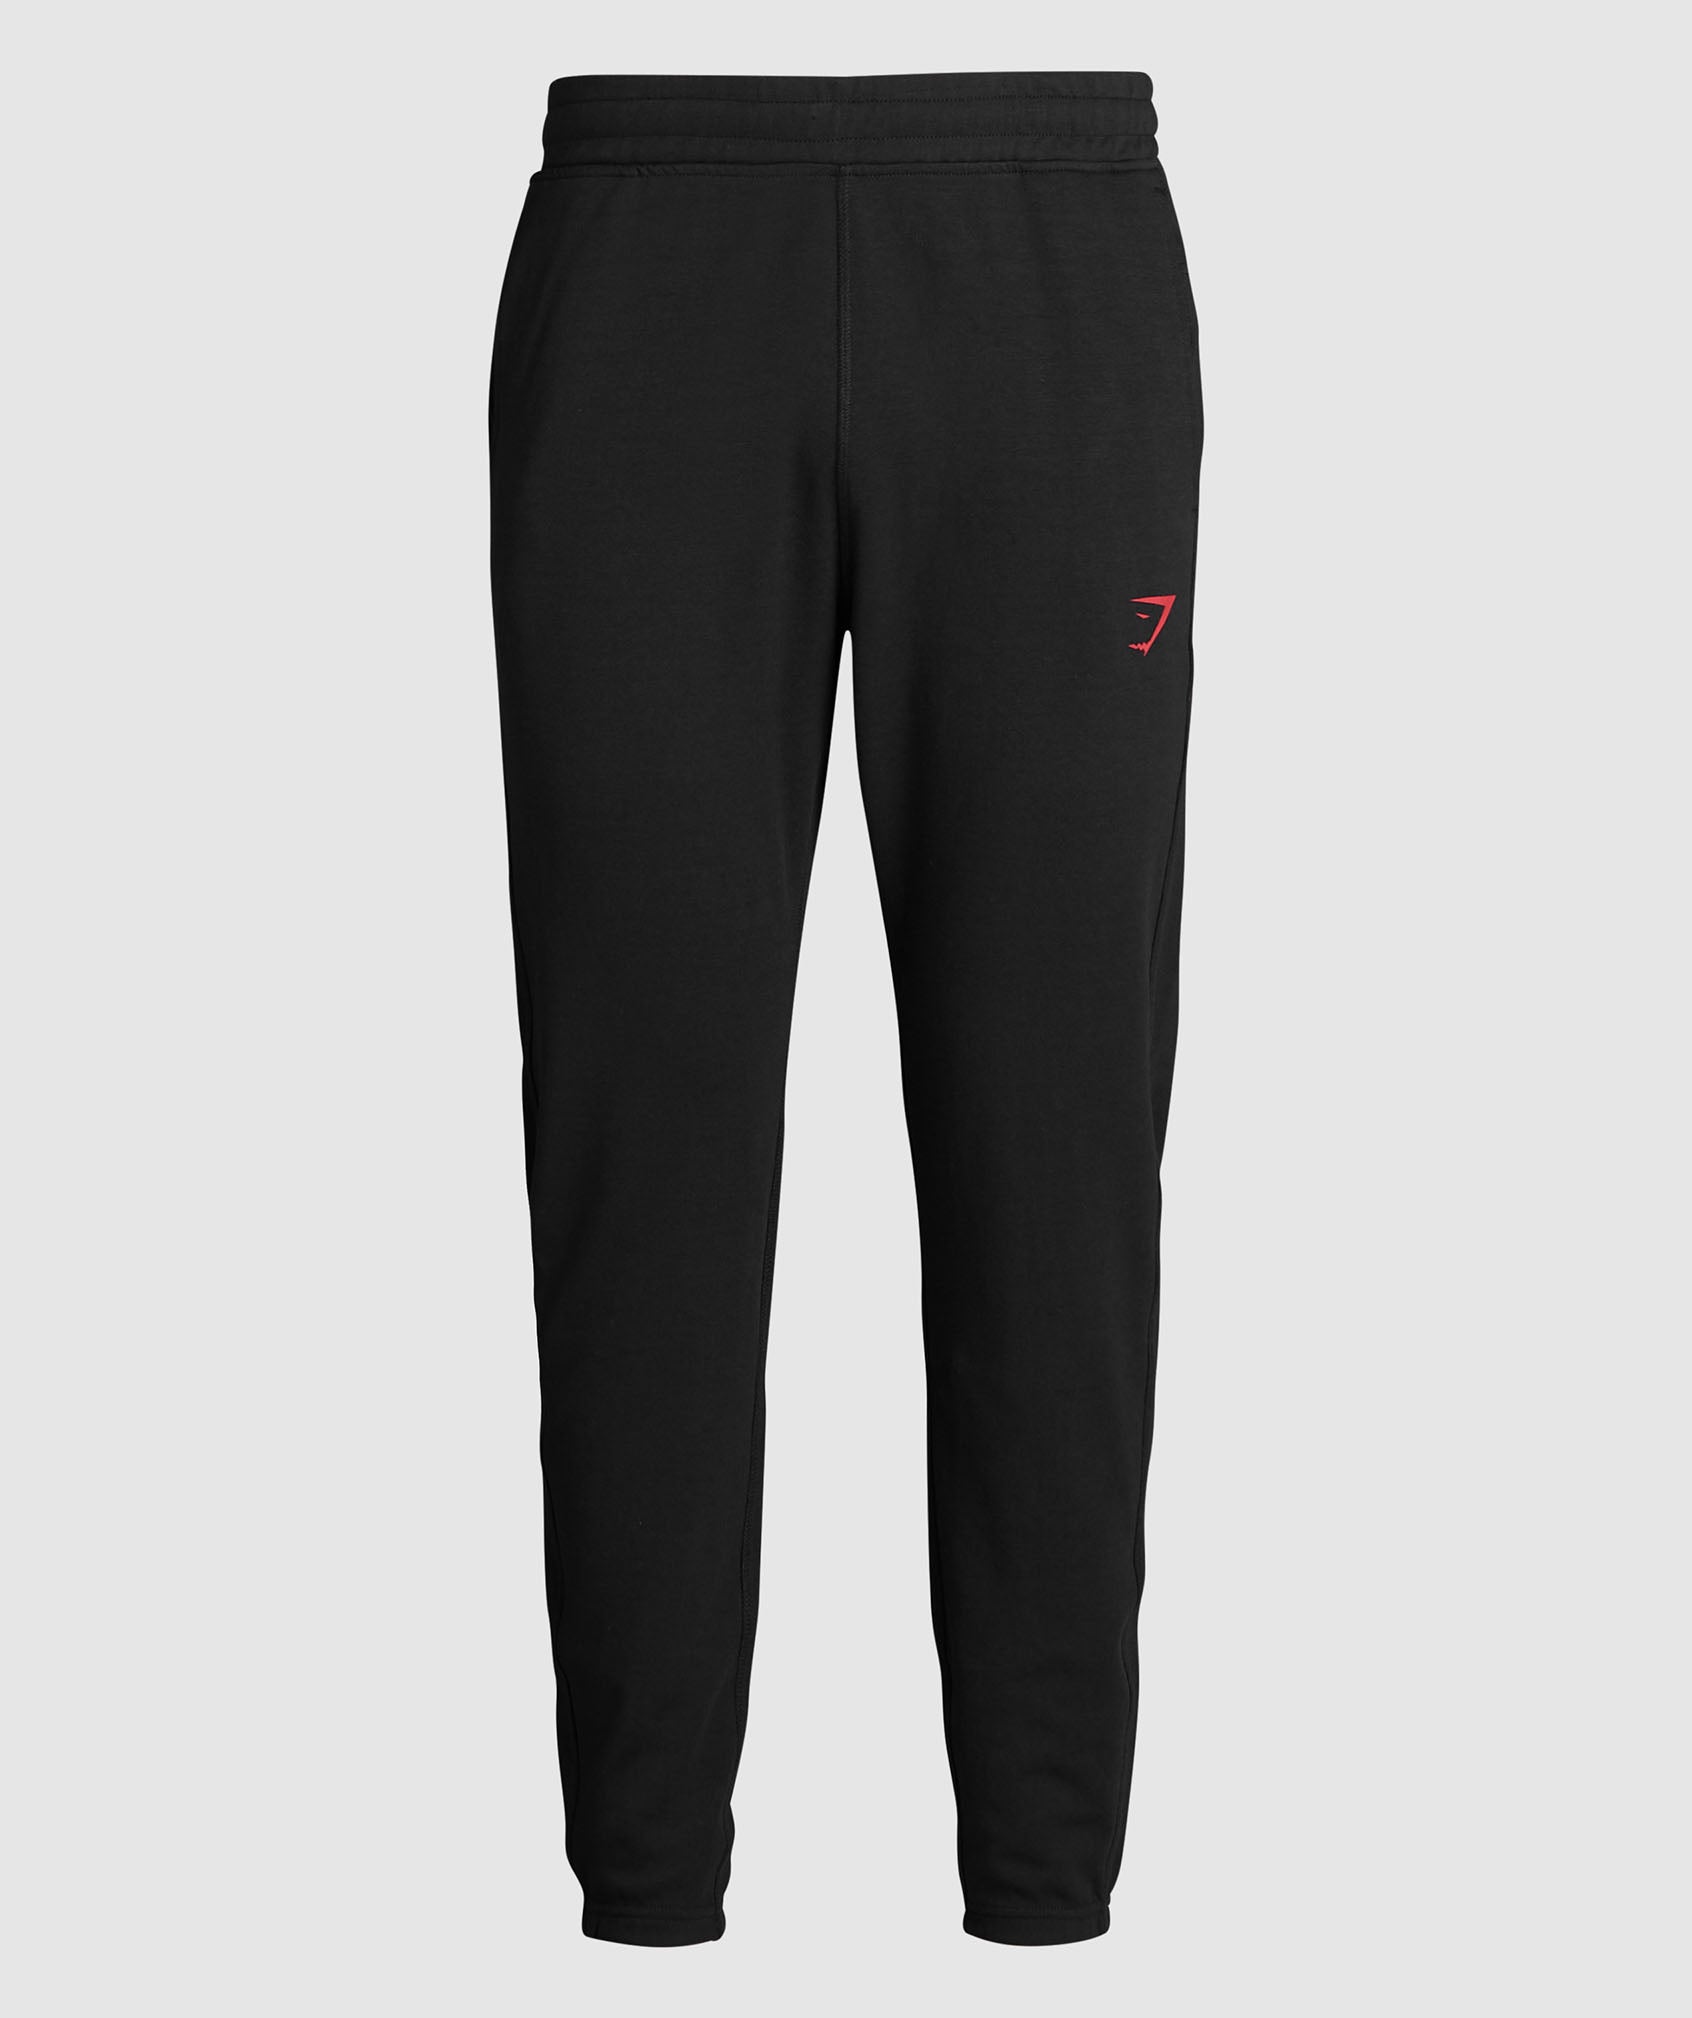 Impact Joggers in Black/Vivid Red - view 8